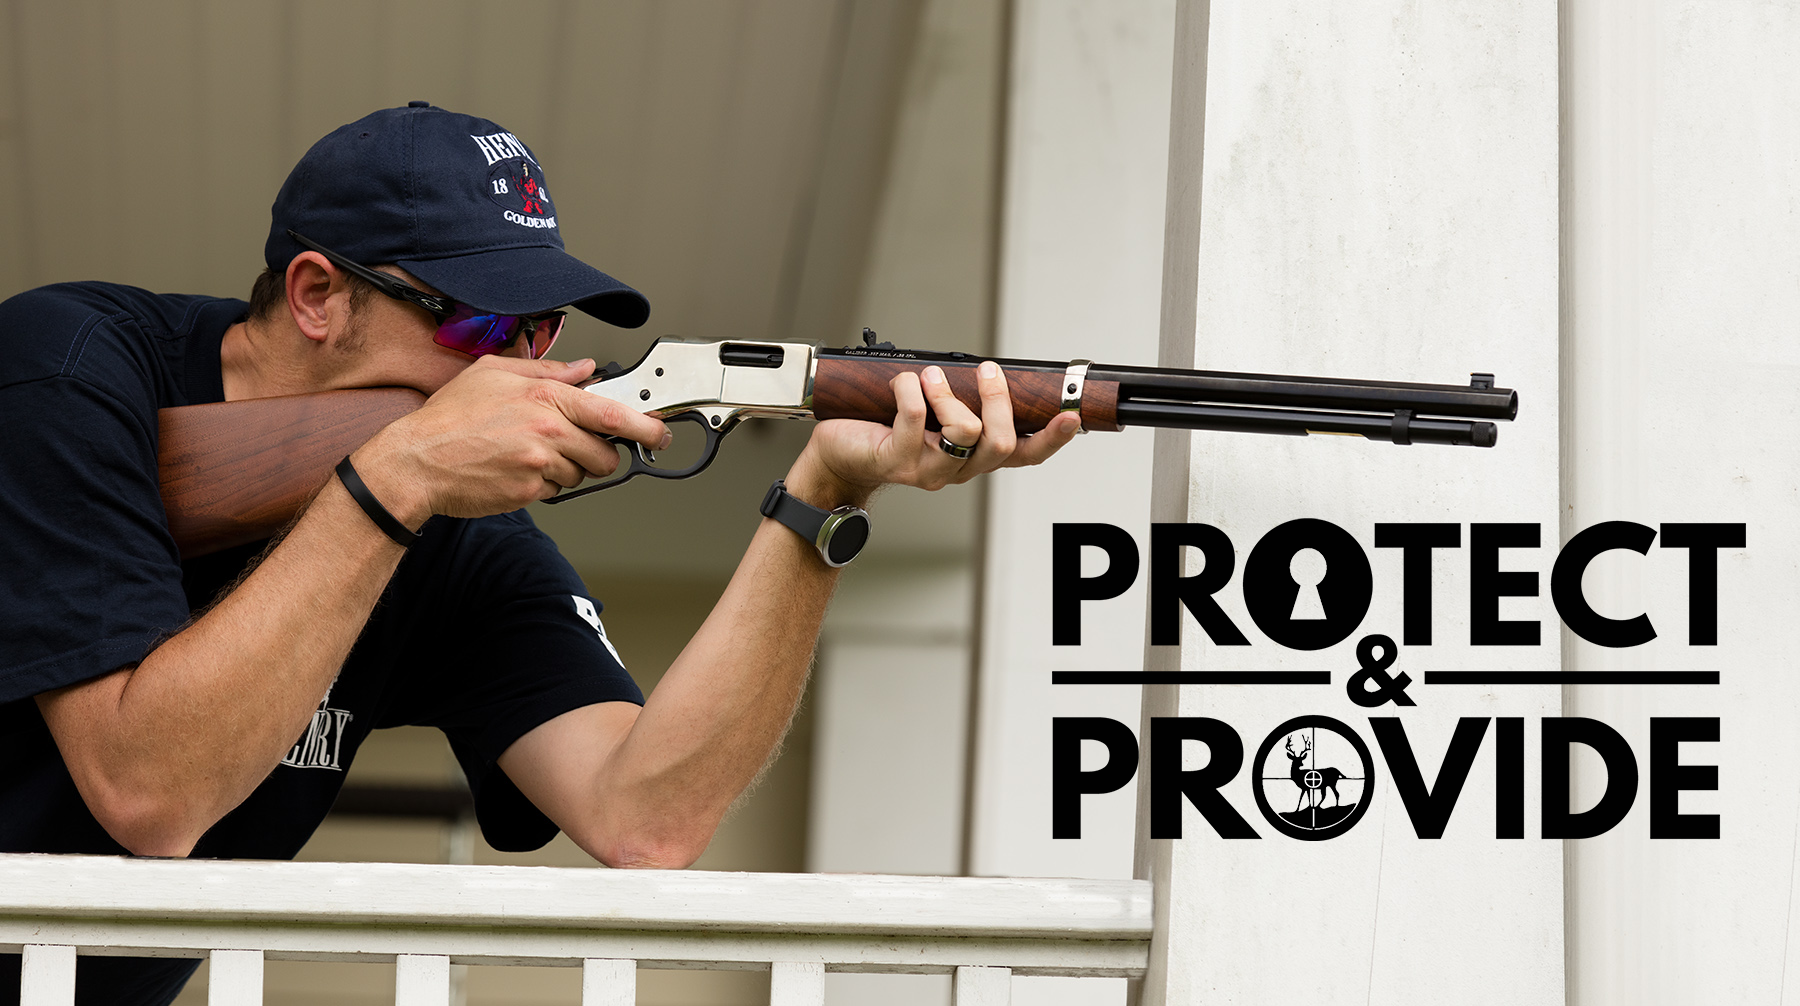 22plinkster aiming Henry Big Boy rifle using a railing as support with Protect & Provide logo